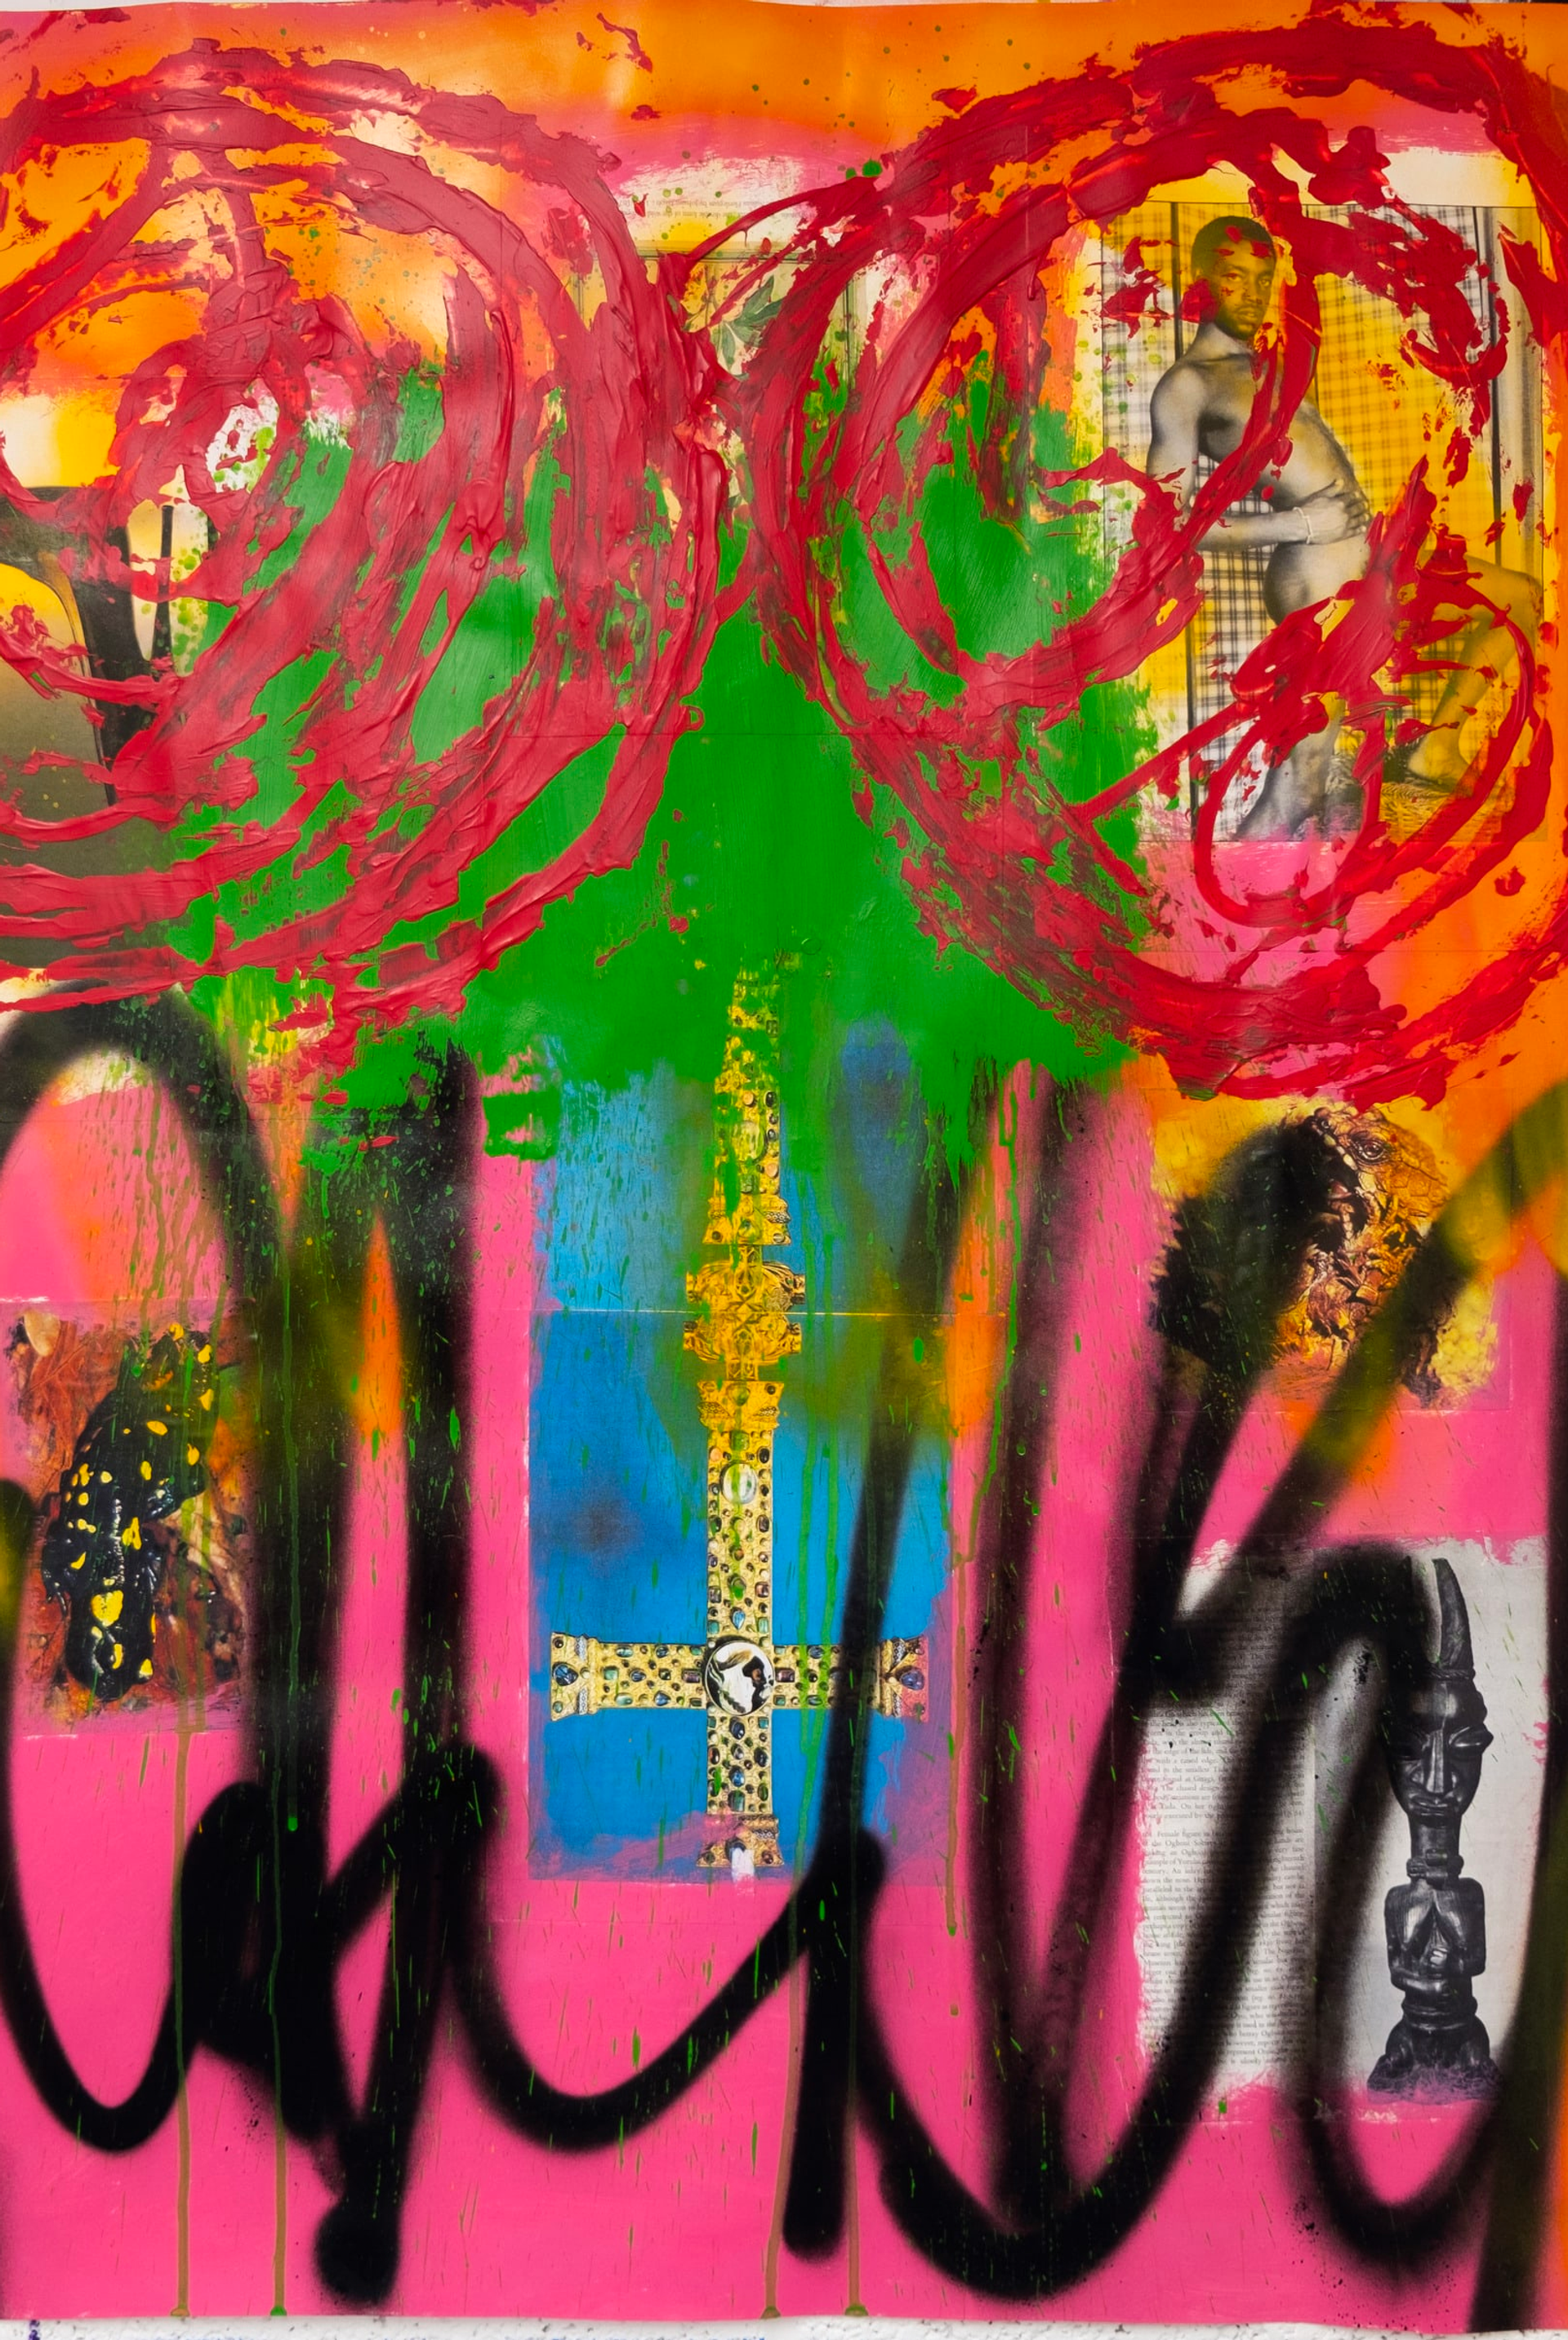 Two red swirls of paint and black, graffiti-style, spray paint, layered over photographic images and a large smudge of green paint, with a bright pink background, by Alexander Ikhide.